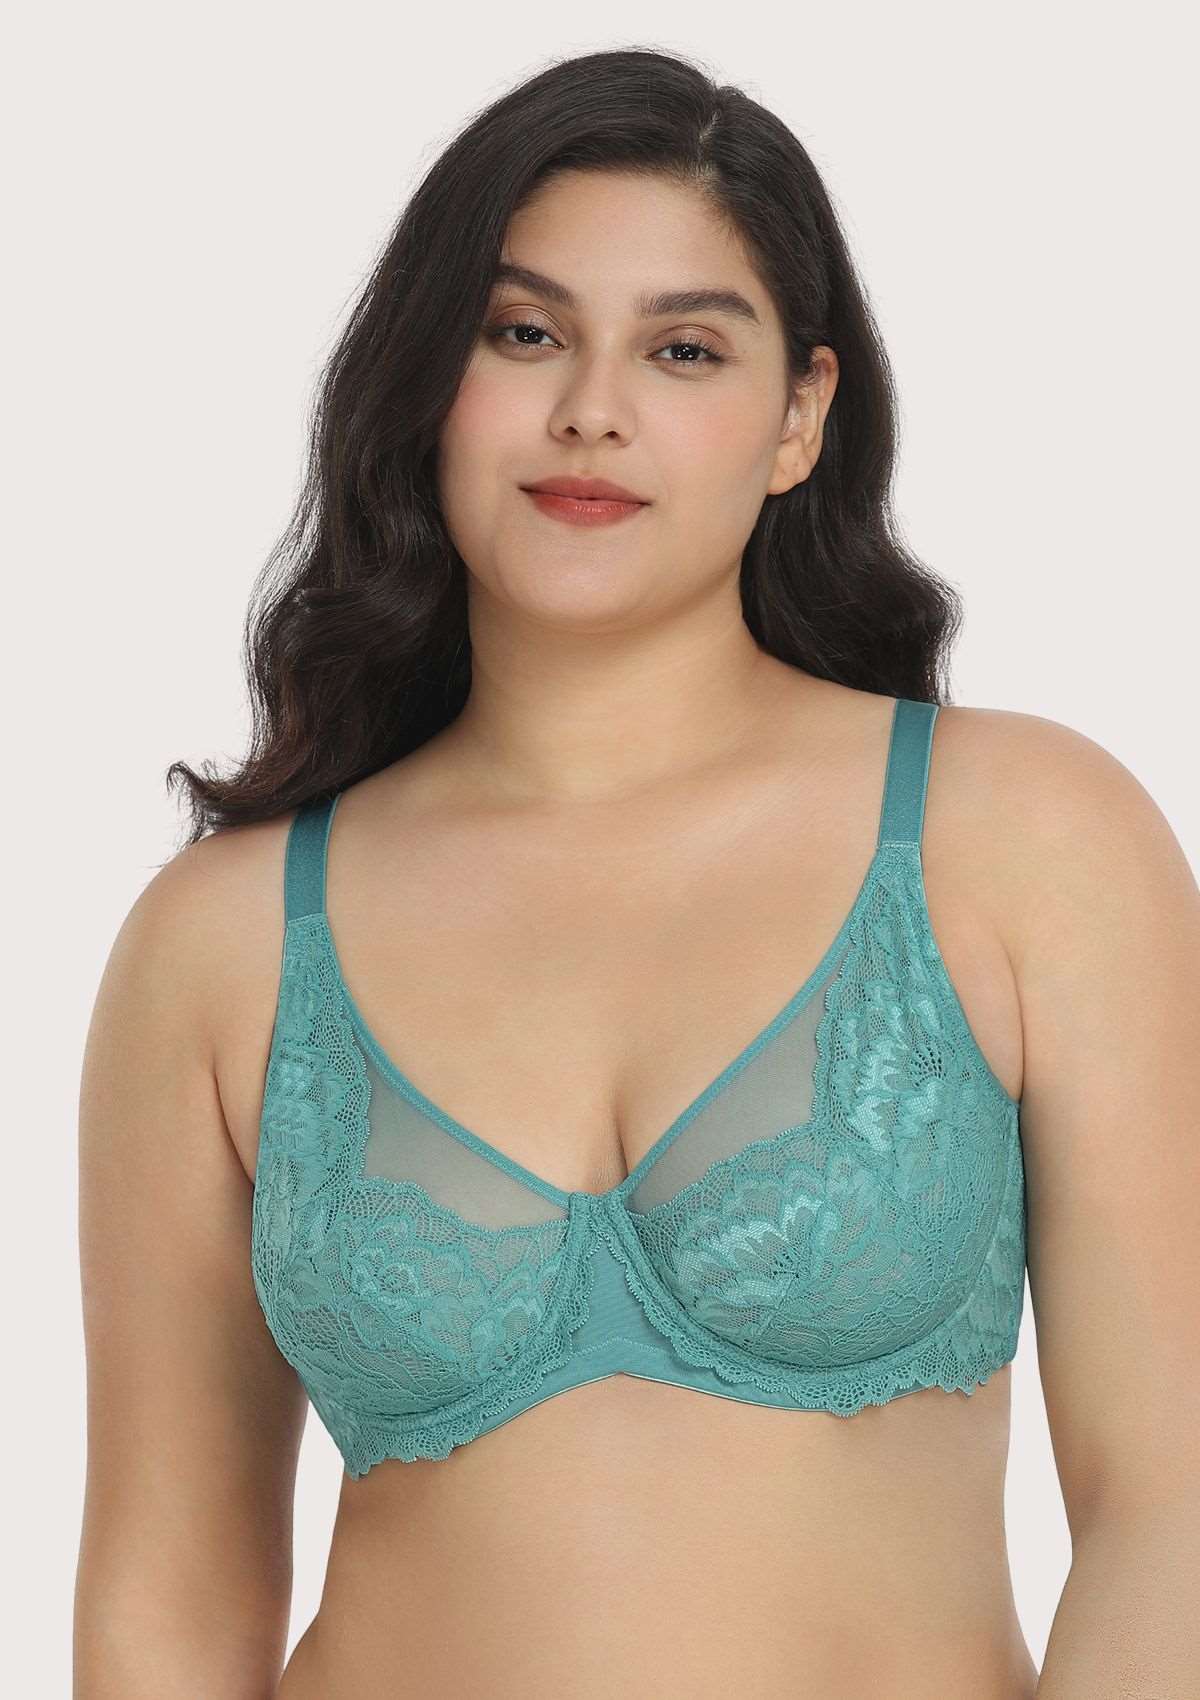 HSIA Paeonia Lace Full Coverage Underwire Non-Padded Uplifting Bra - Teal / 34 / DDD/F